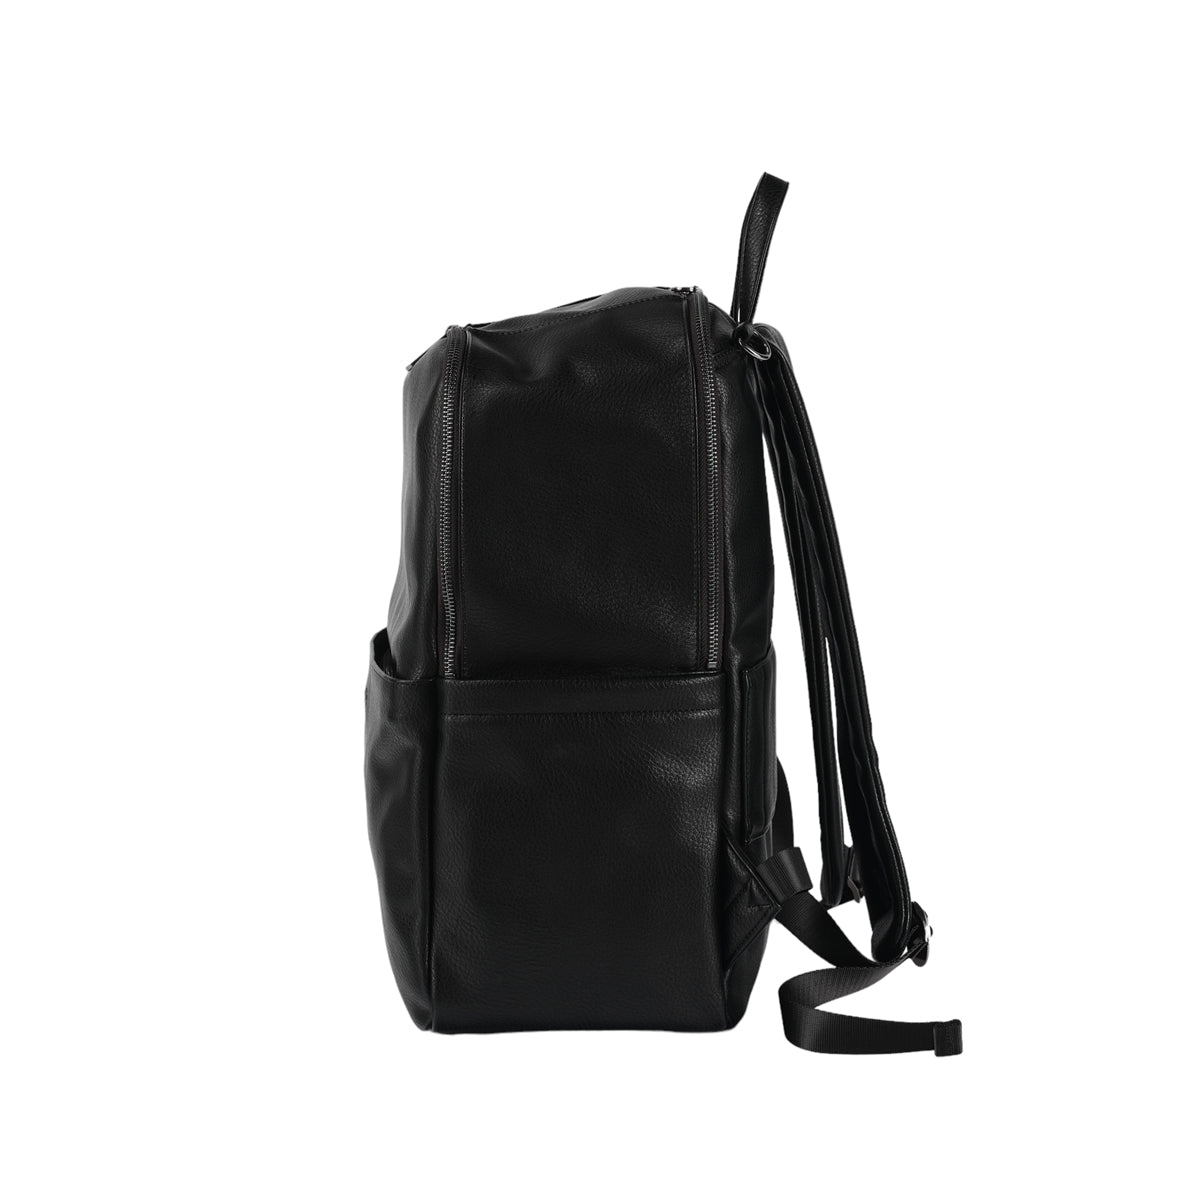 OiOi Faux Leather Multitasker Nappy Backpack - Black